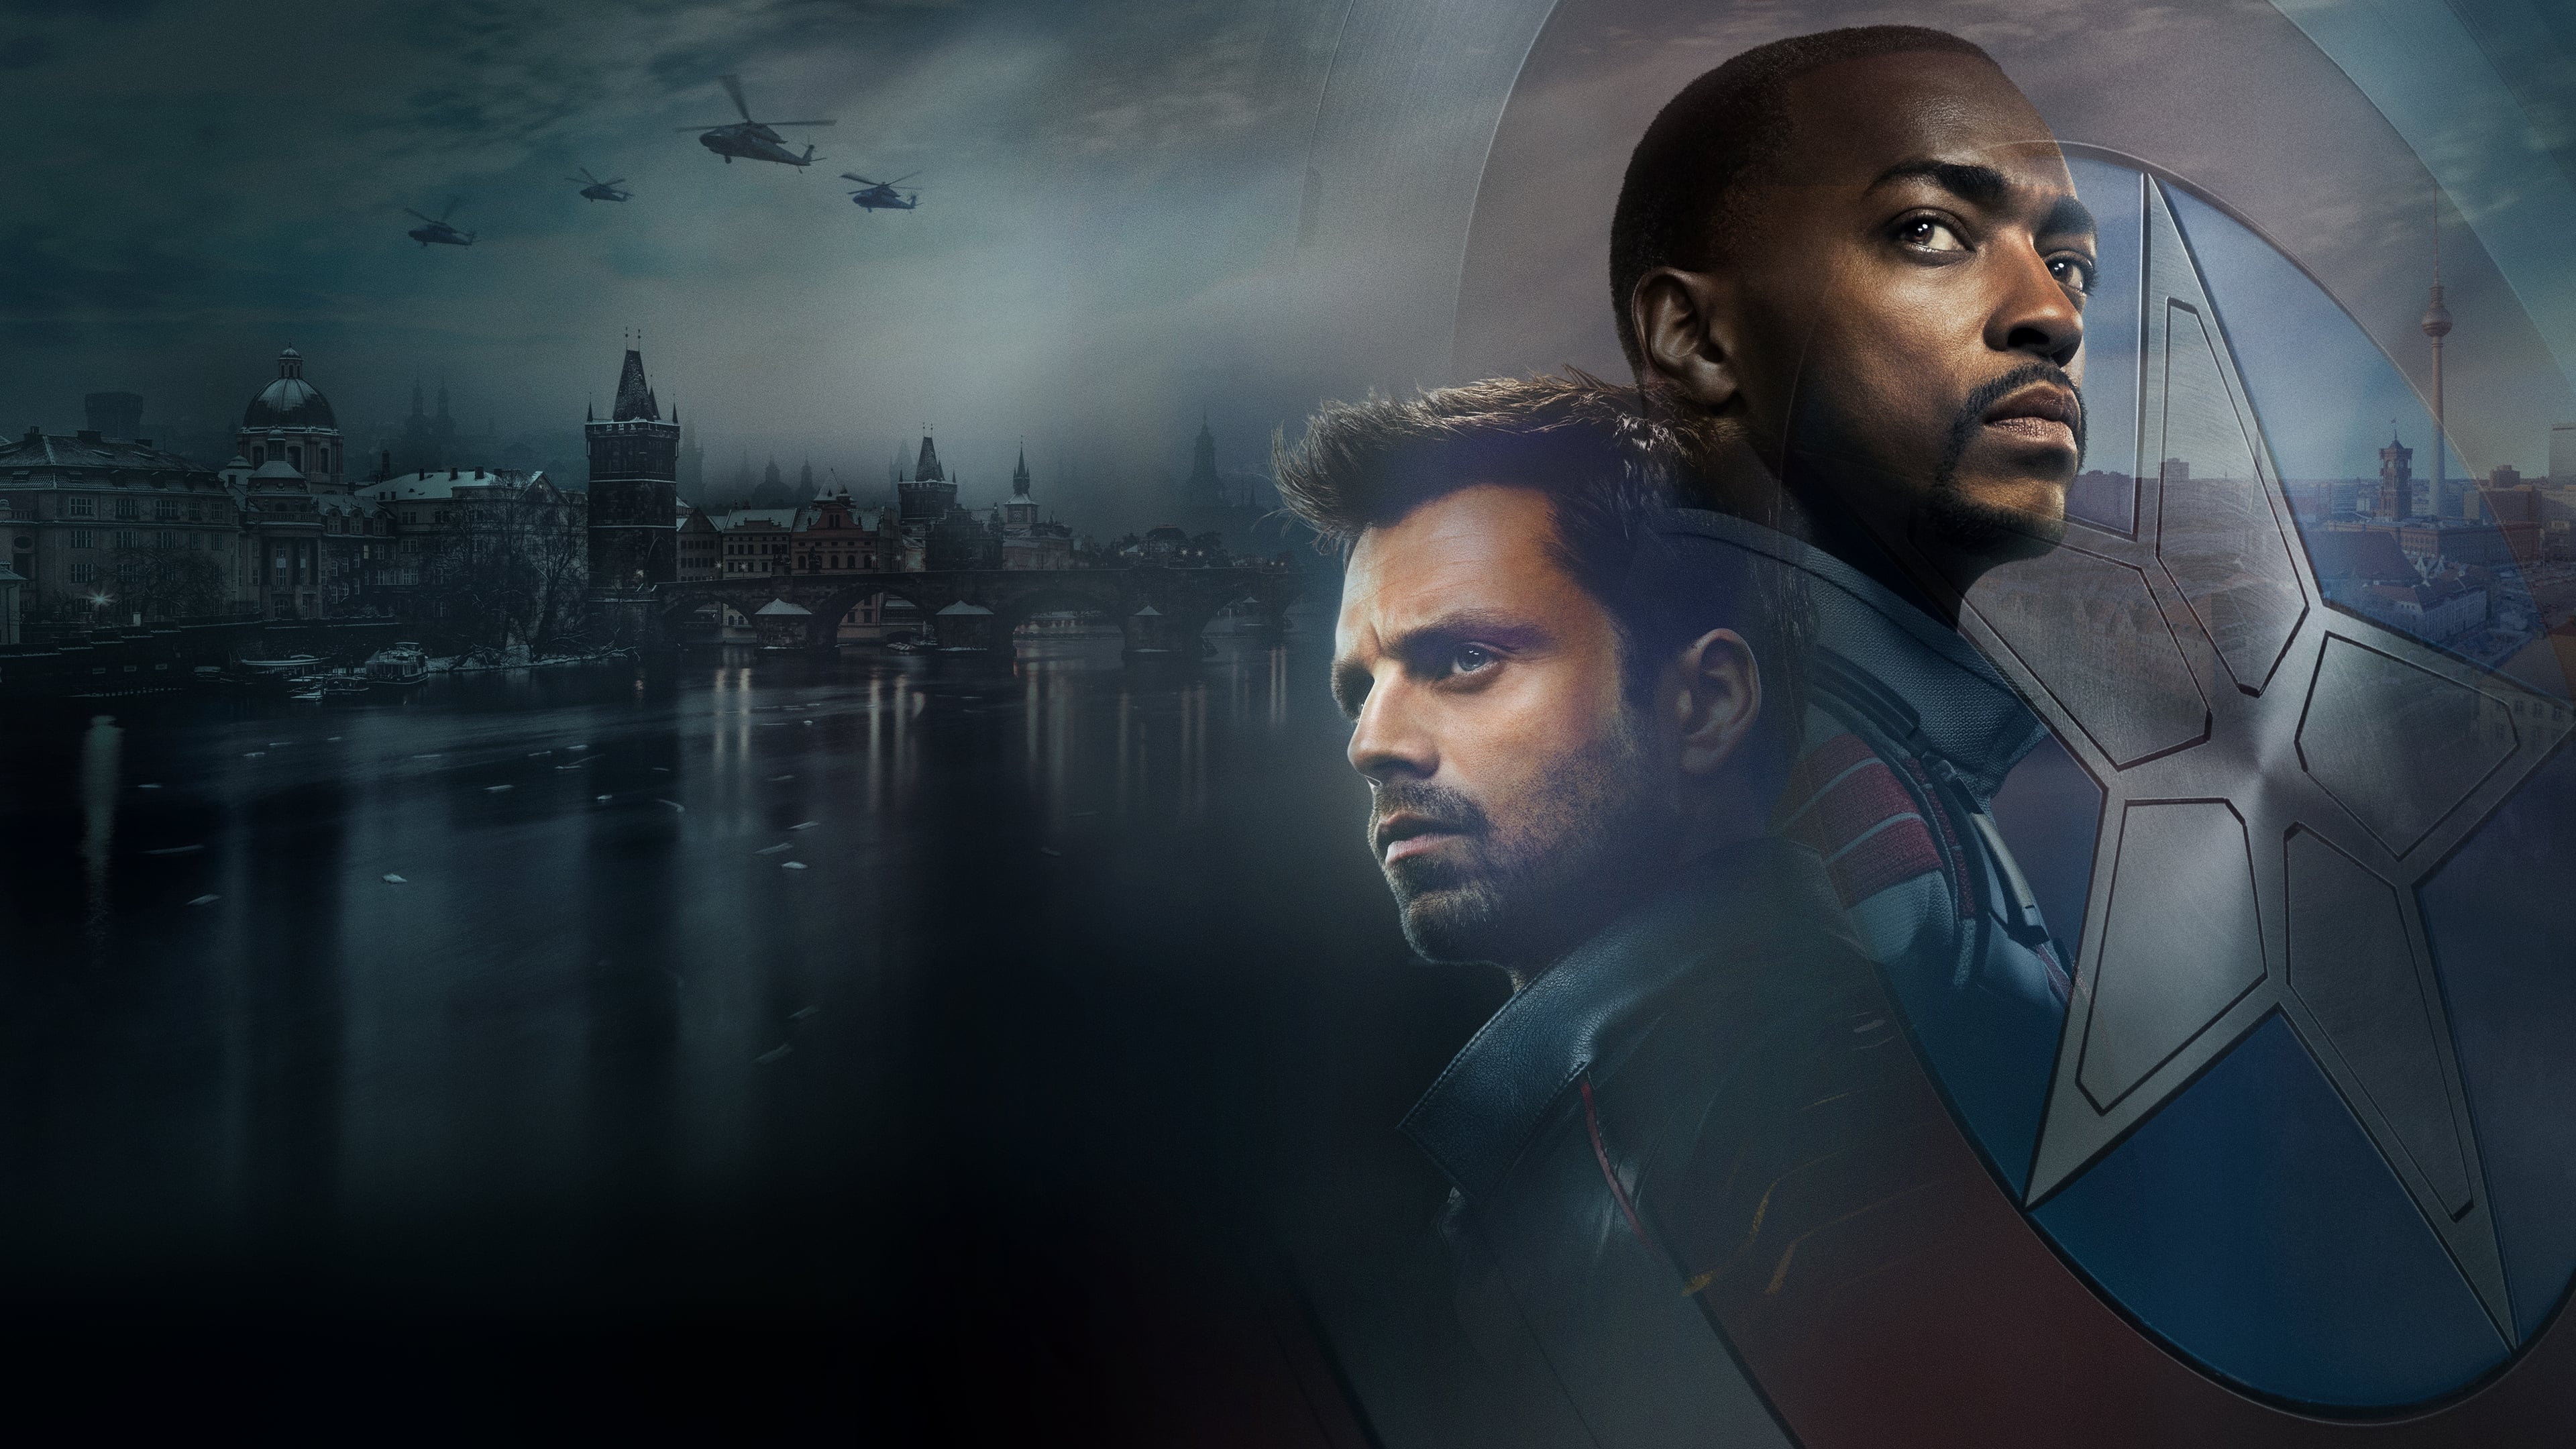 HD wallpaper, Sam Wilson, Tv Series, Bucky Barnes, The Falcon And The Winter Soldier, Anthony Mackie, 2021 Movies, Sebastian Stan